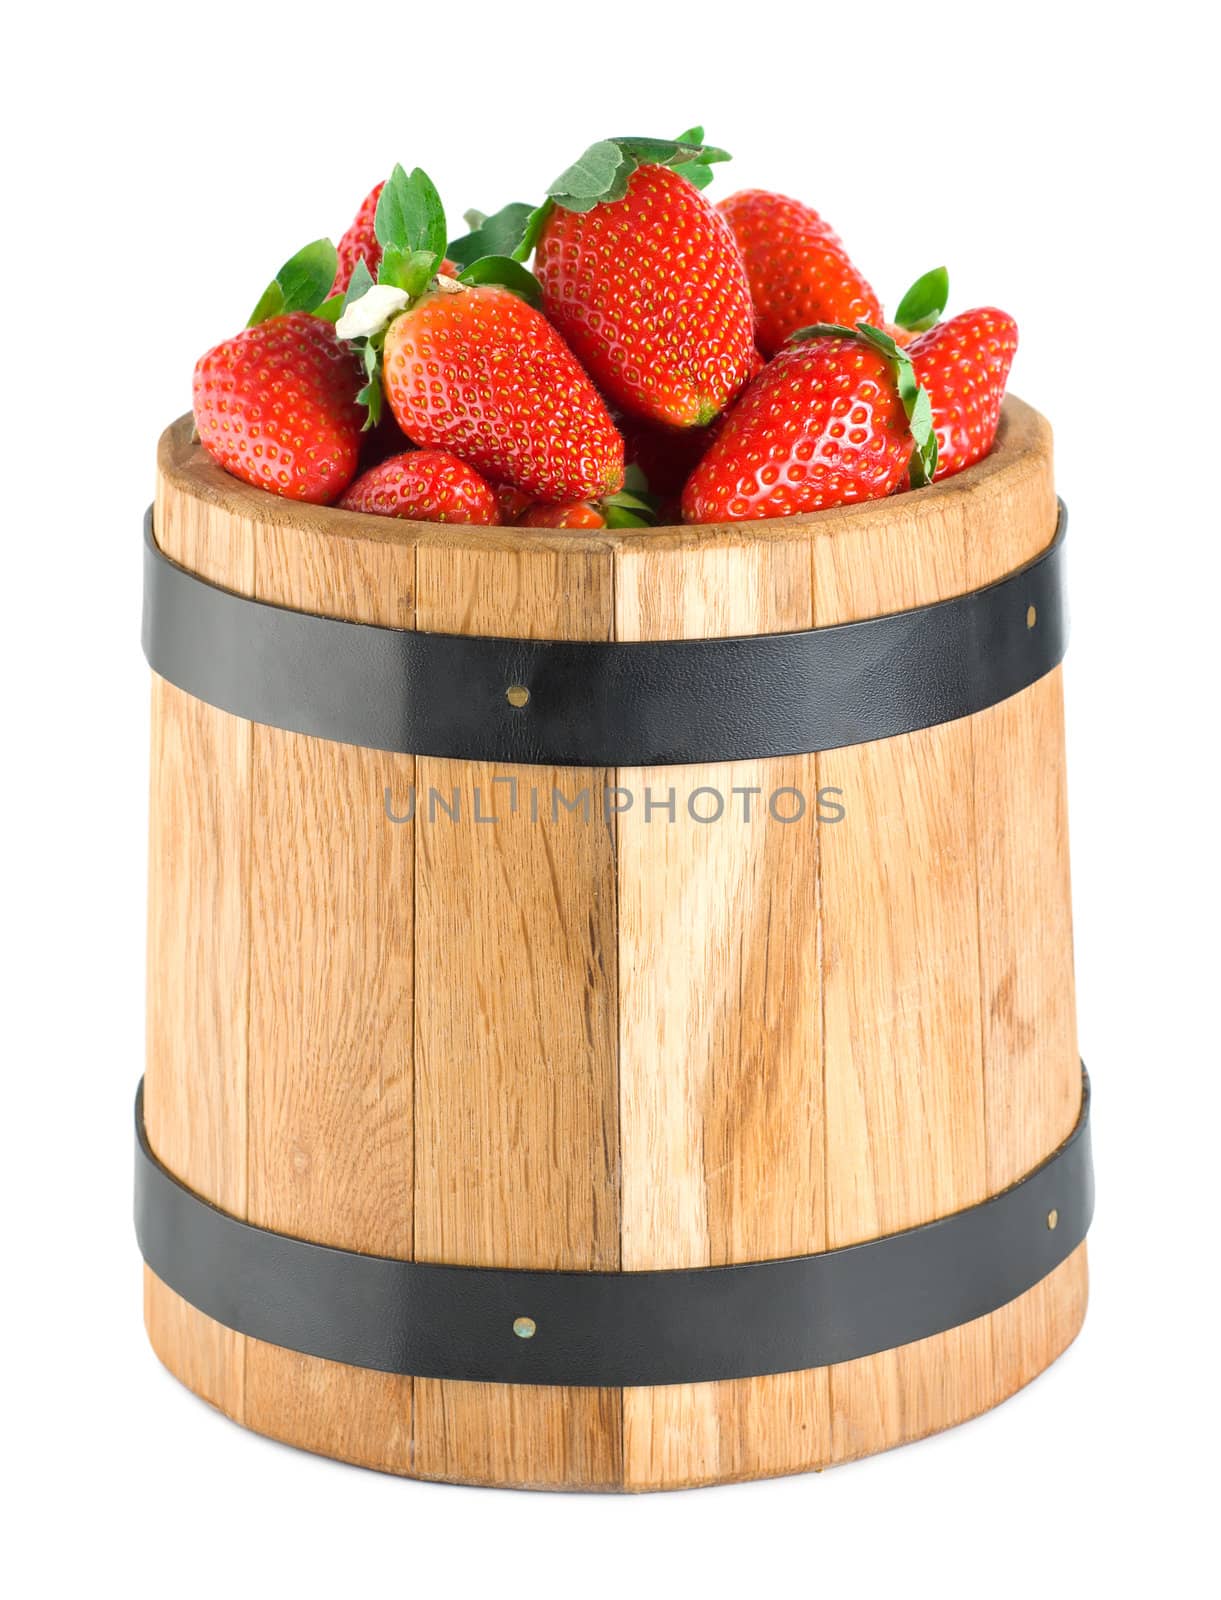 Wooden barrel with strawberries isolated on white background